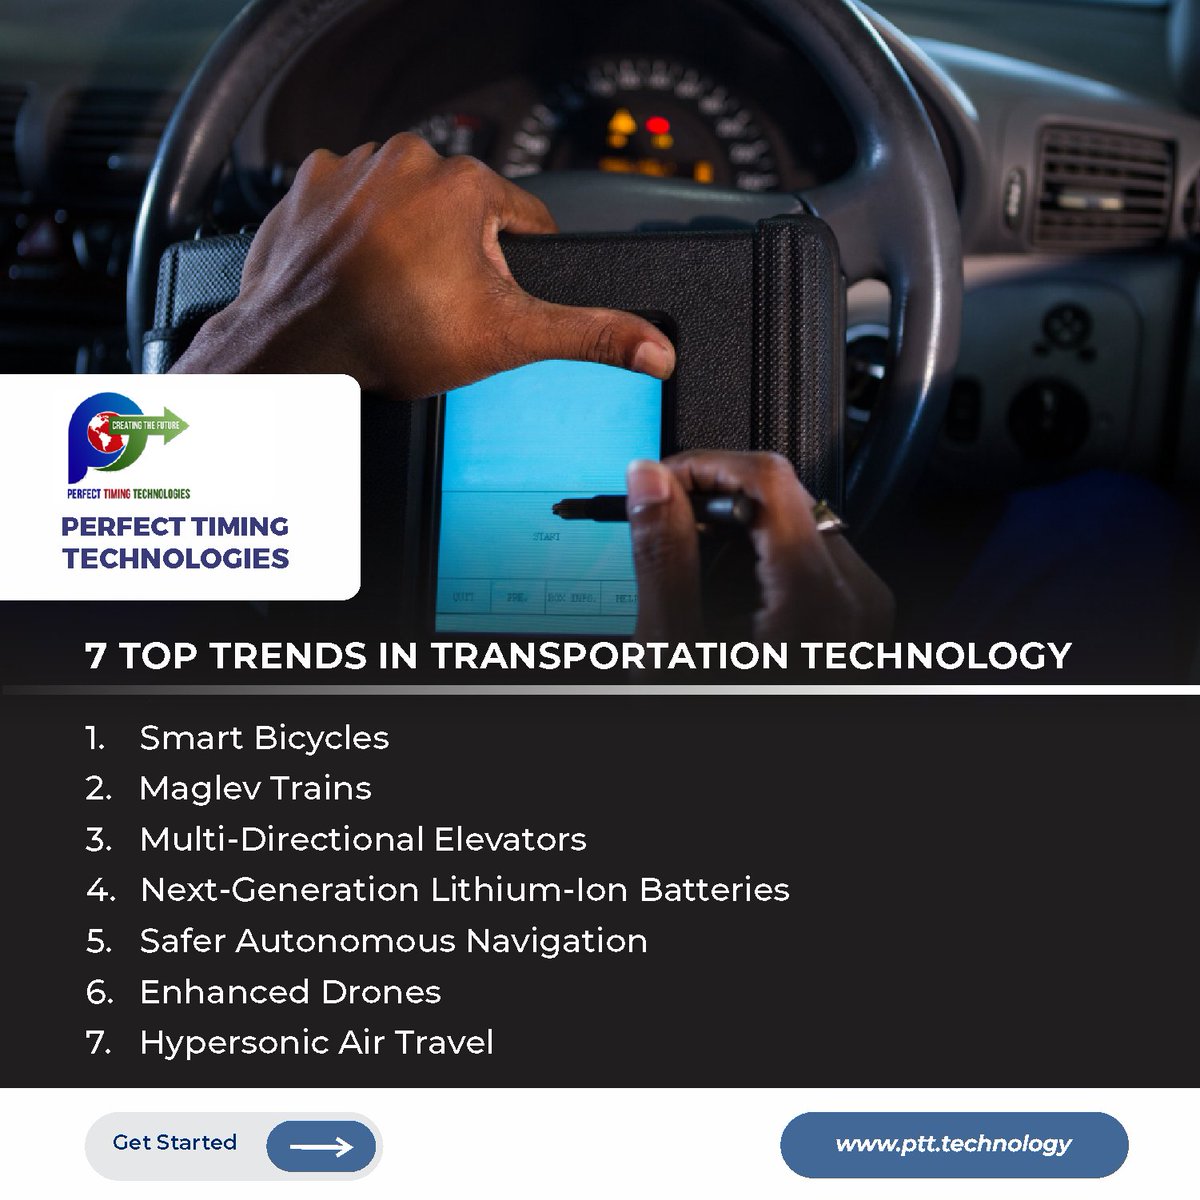 7 Top Trends in Transportation Technology

Read Here: asme.org/topics-resourc…

#TransportationTechnology #TechTrends #Innovation #FutureTech #TransportationIndustry #TechnologyTrends #CuttingEdge #TransportationInnovation #TechNews #PerfectTimingTechnology #PerfectTimingHolding